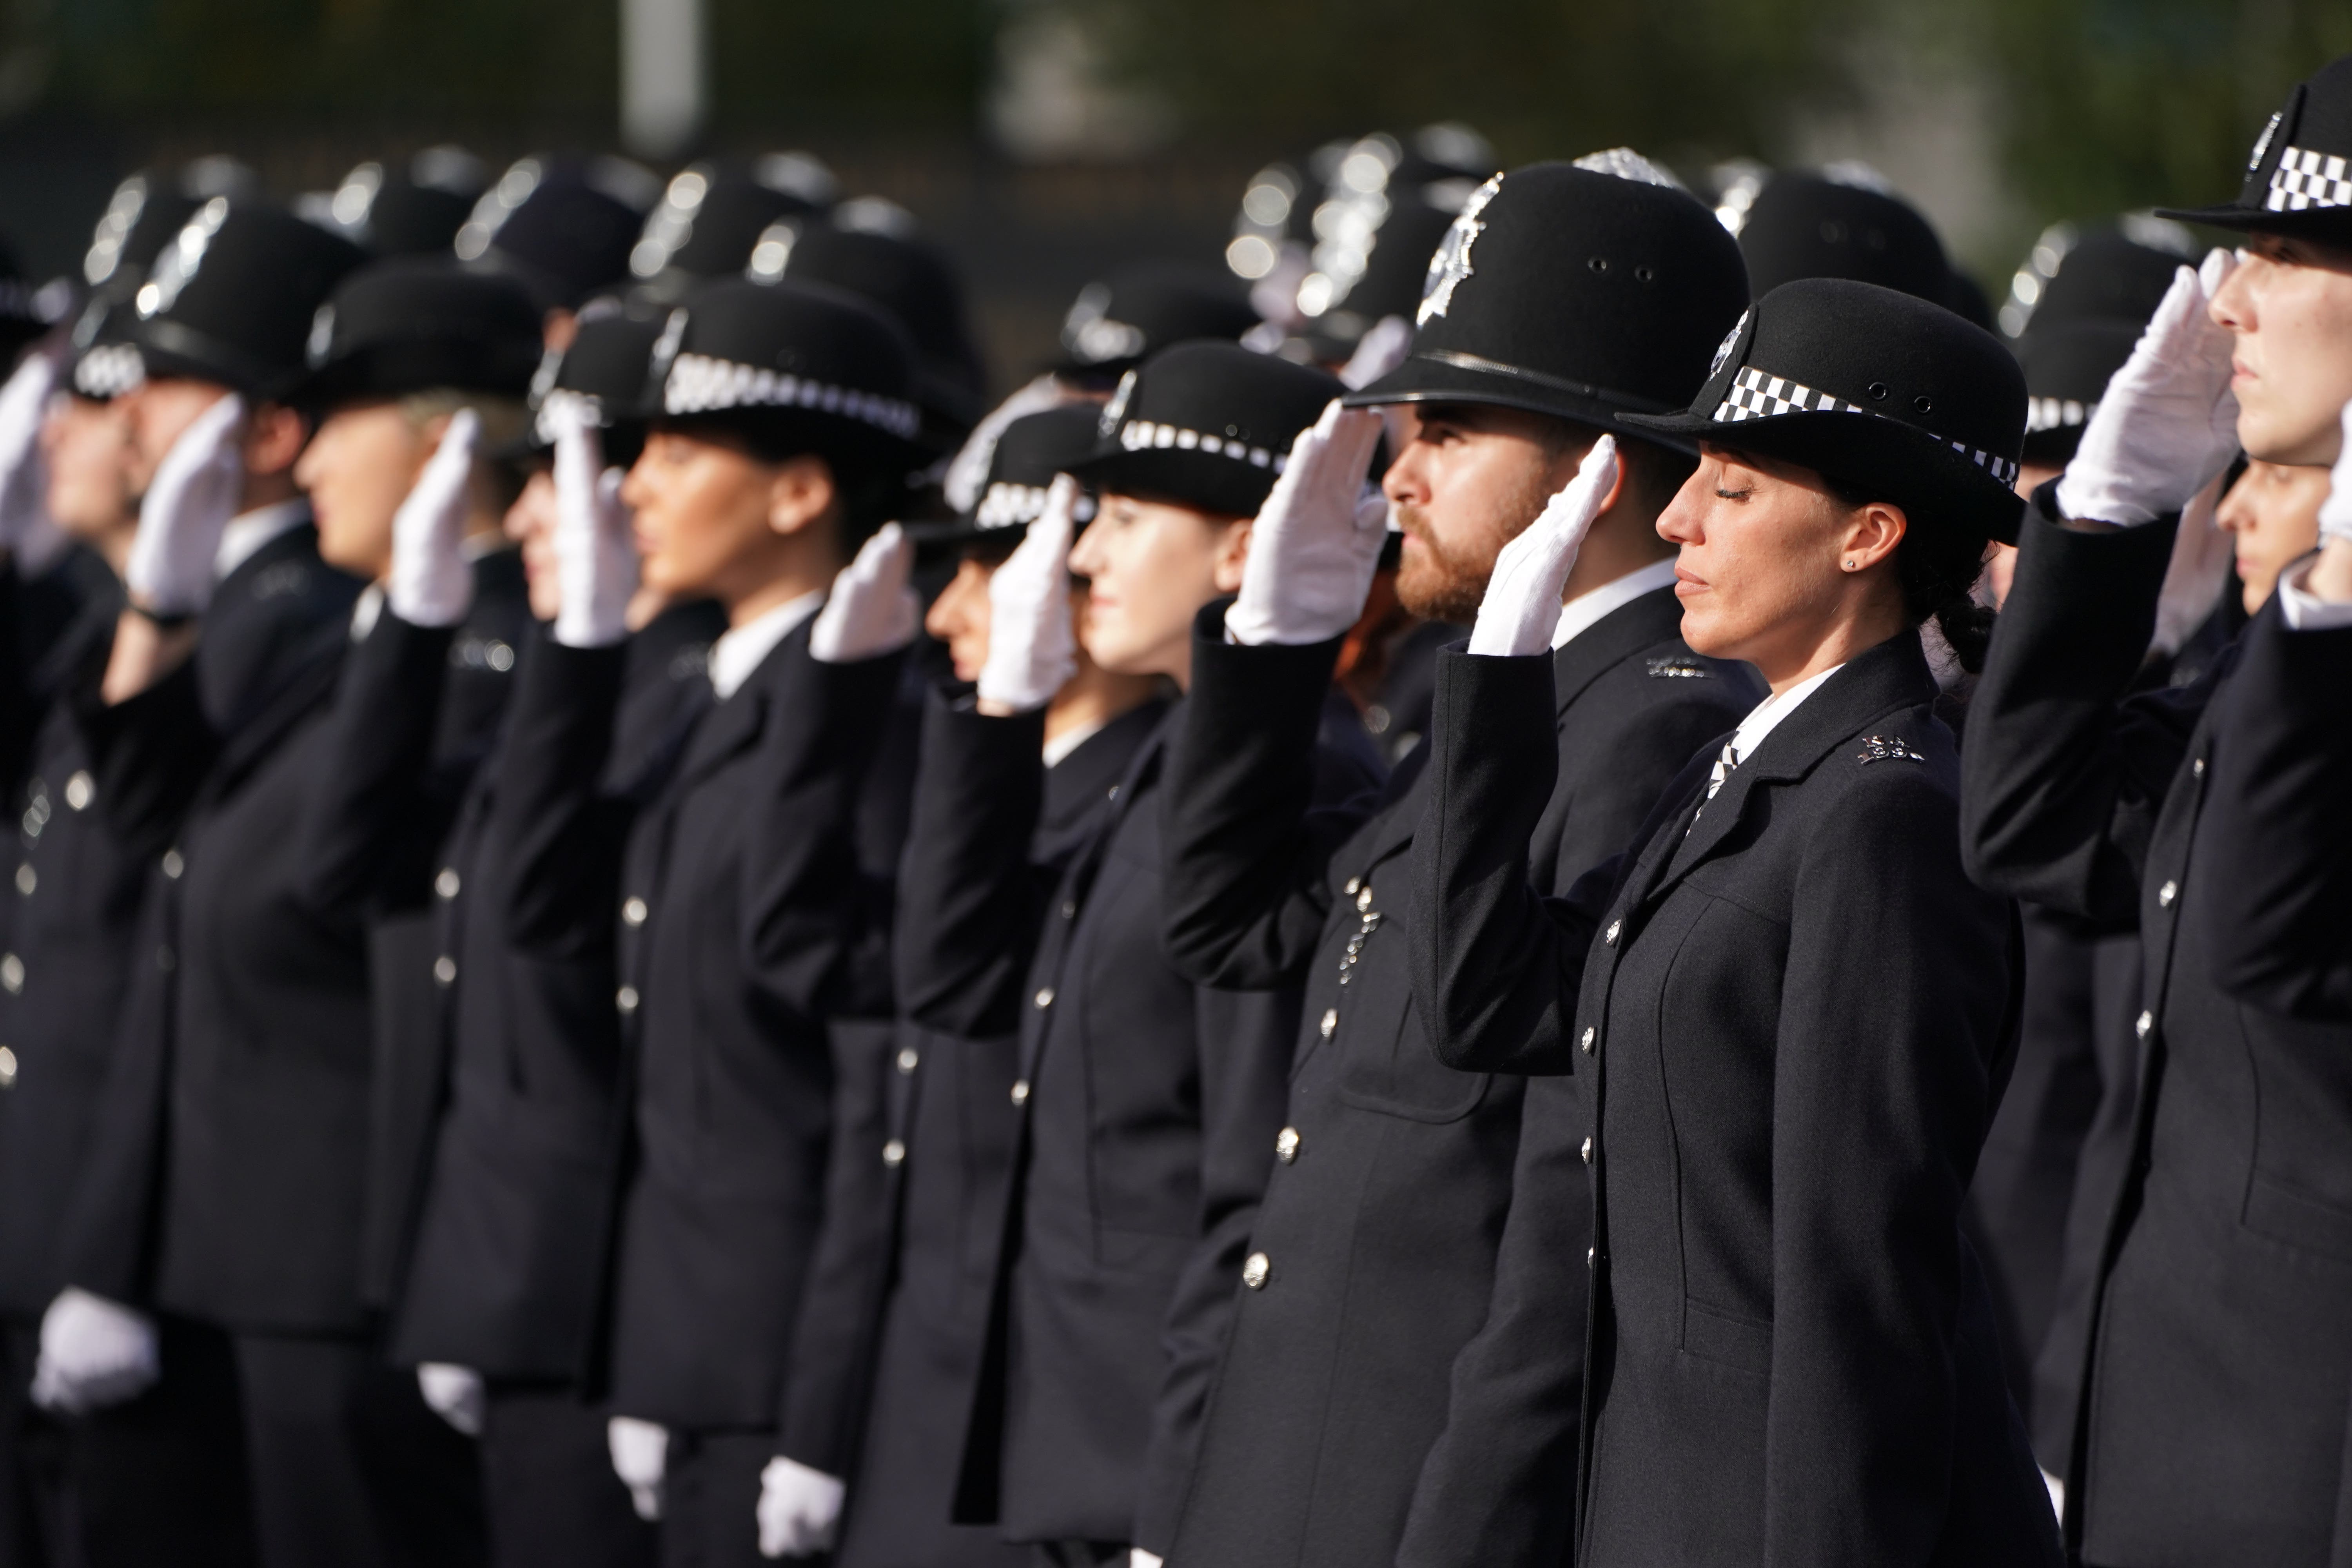 The Casey Review said the Met Police had failed to protect women from abusers in the force